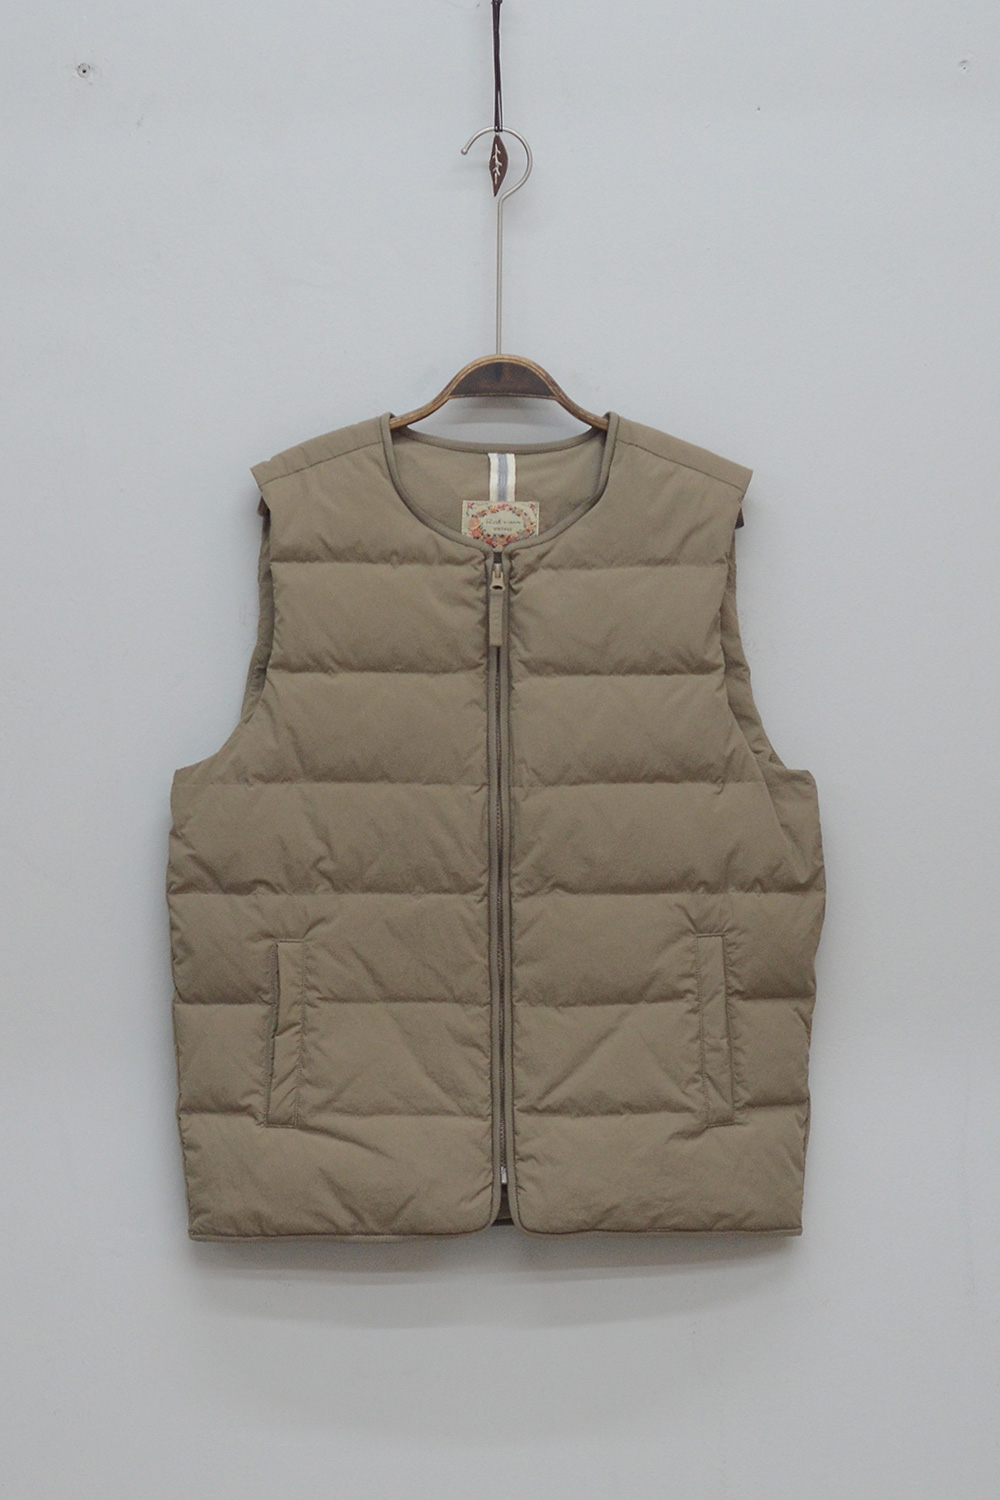 Down jacket oatmeal color image-S1L52